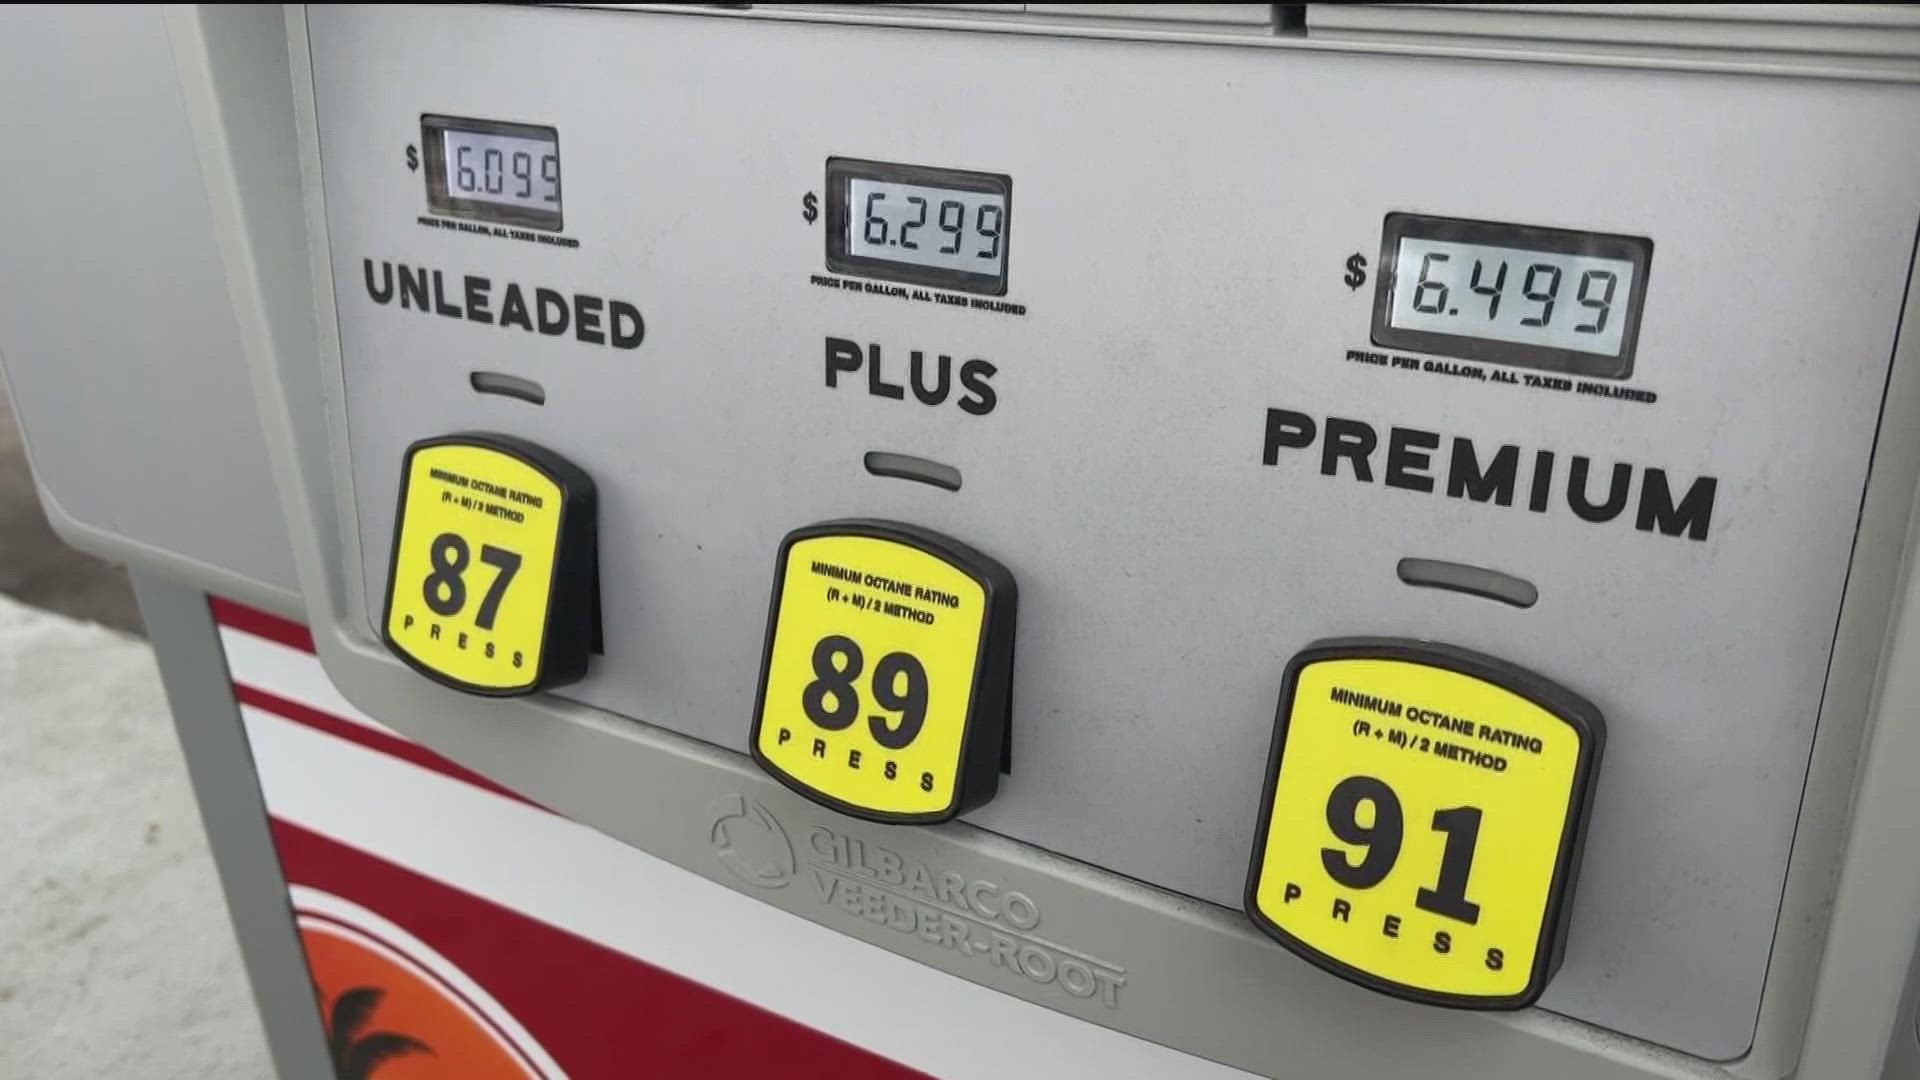 The price difference between California and the rest of the country is now $2.60 per gallon.